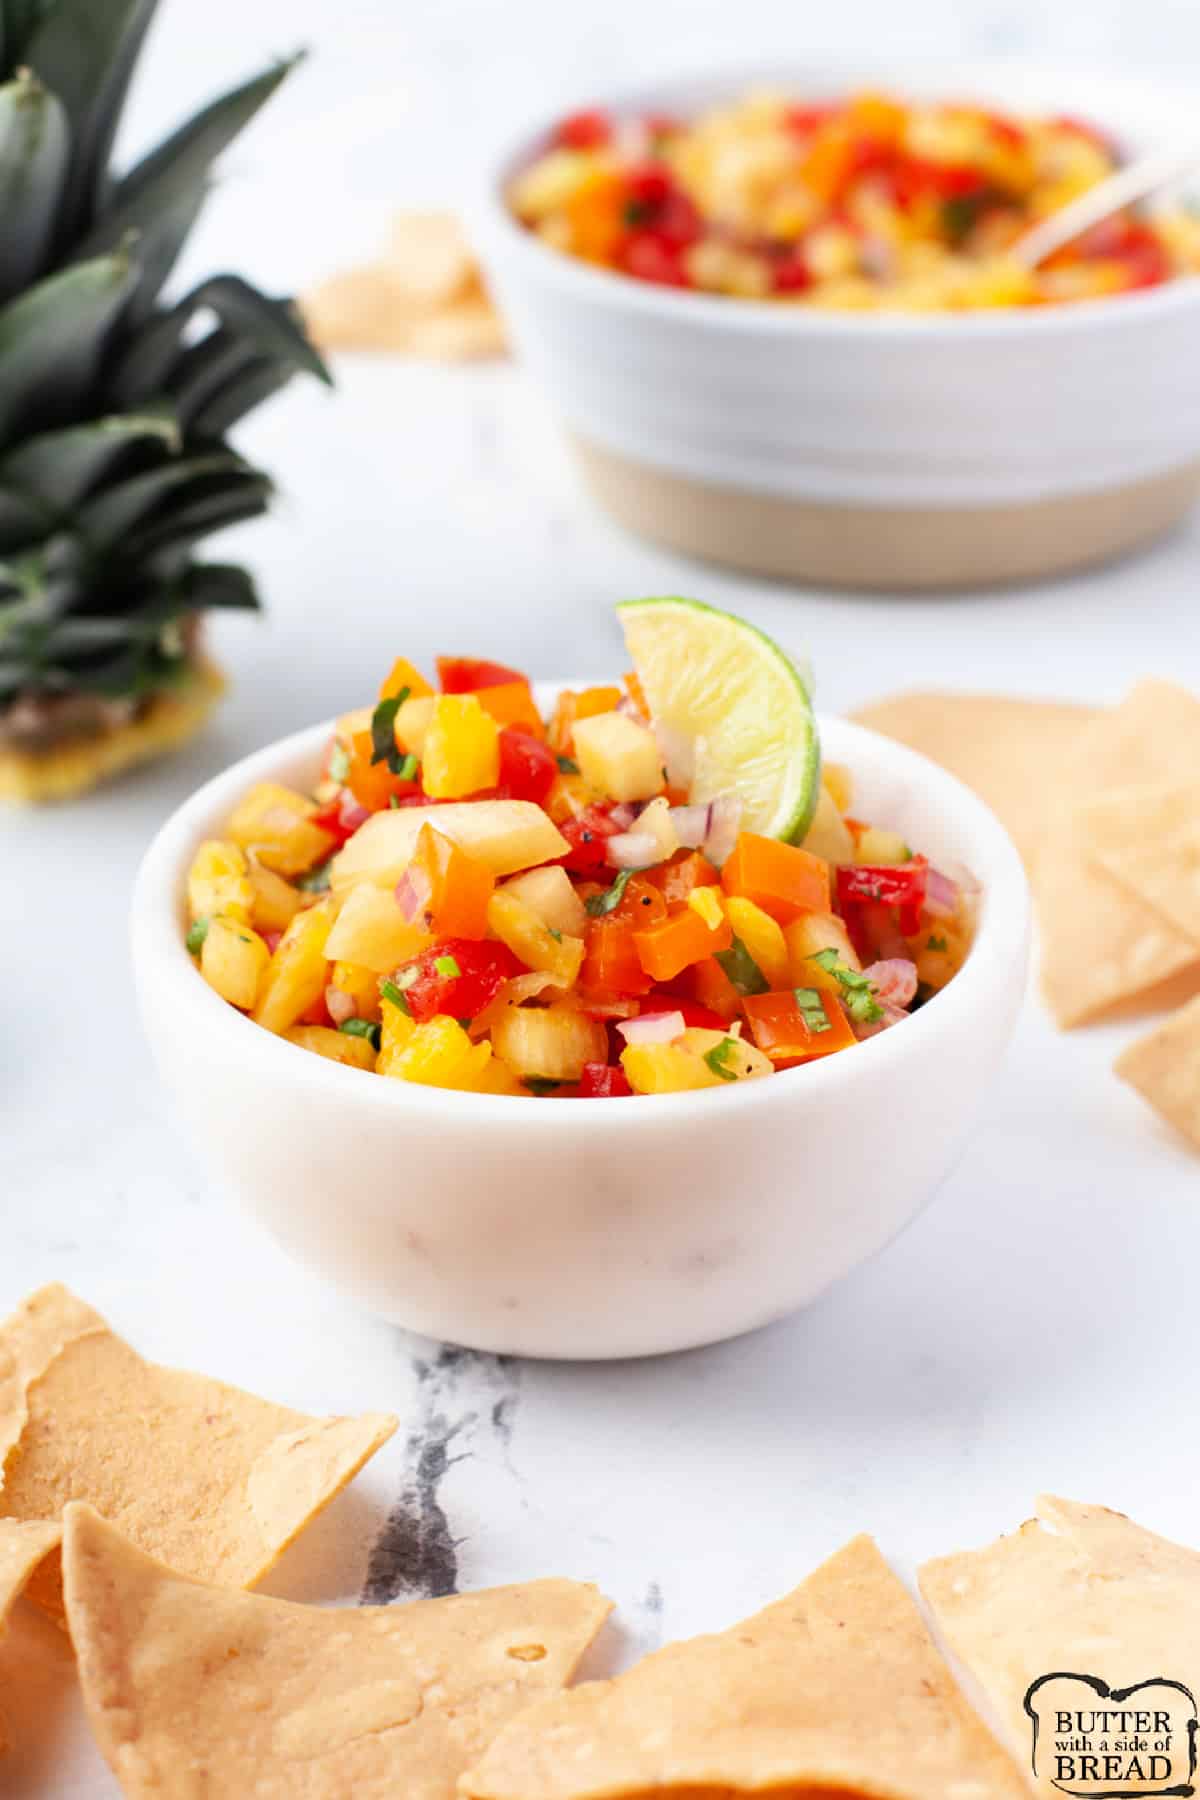 Salsa made with peppers, tomatoes and fresh pineapple